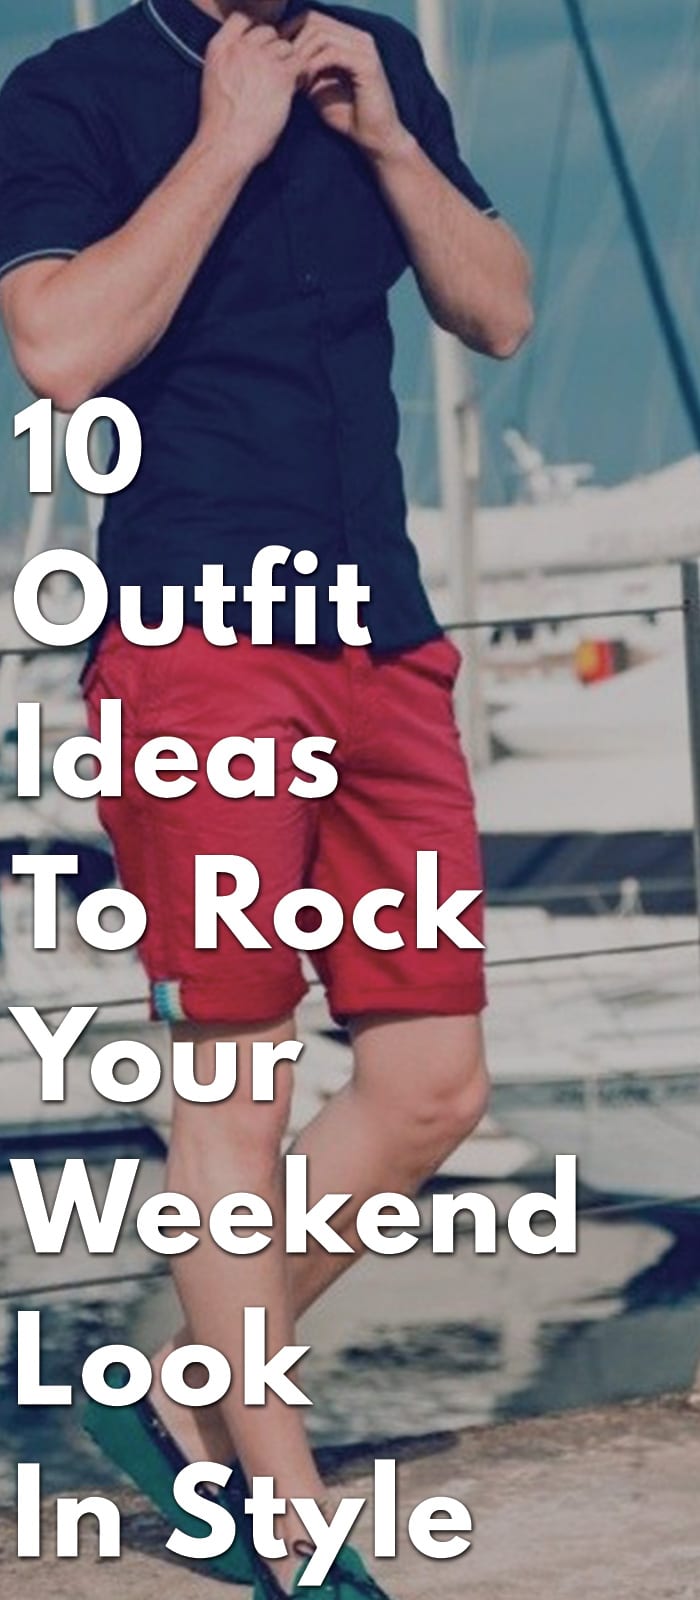 10-Outfit-Ideas-To-Rock-Your-Weekend-Look-In-Style